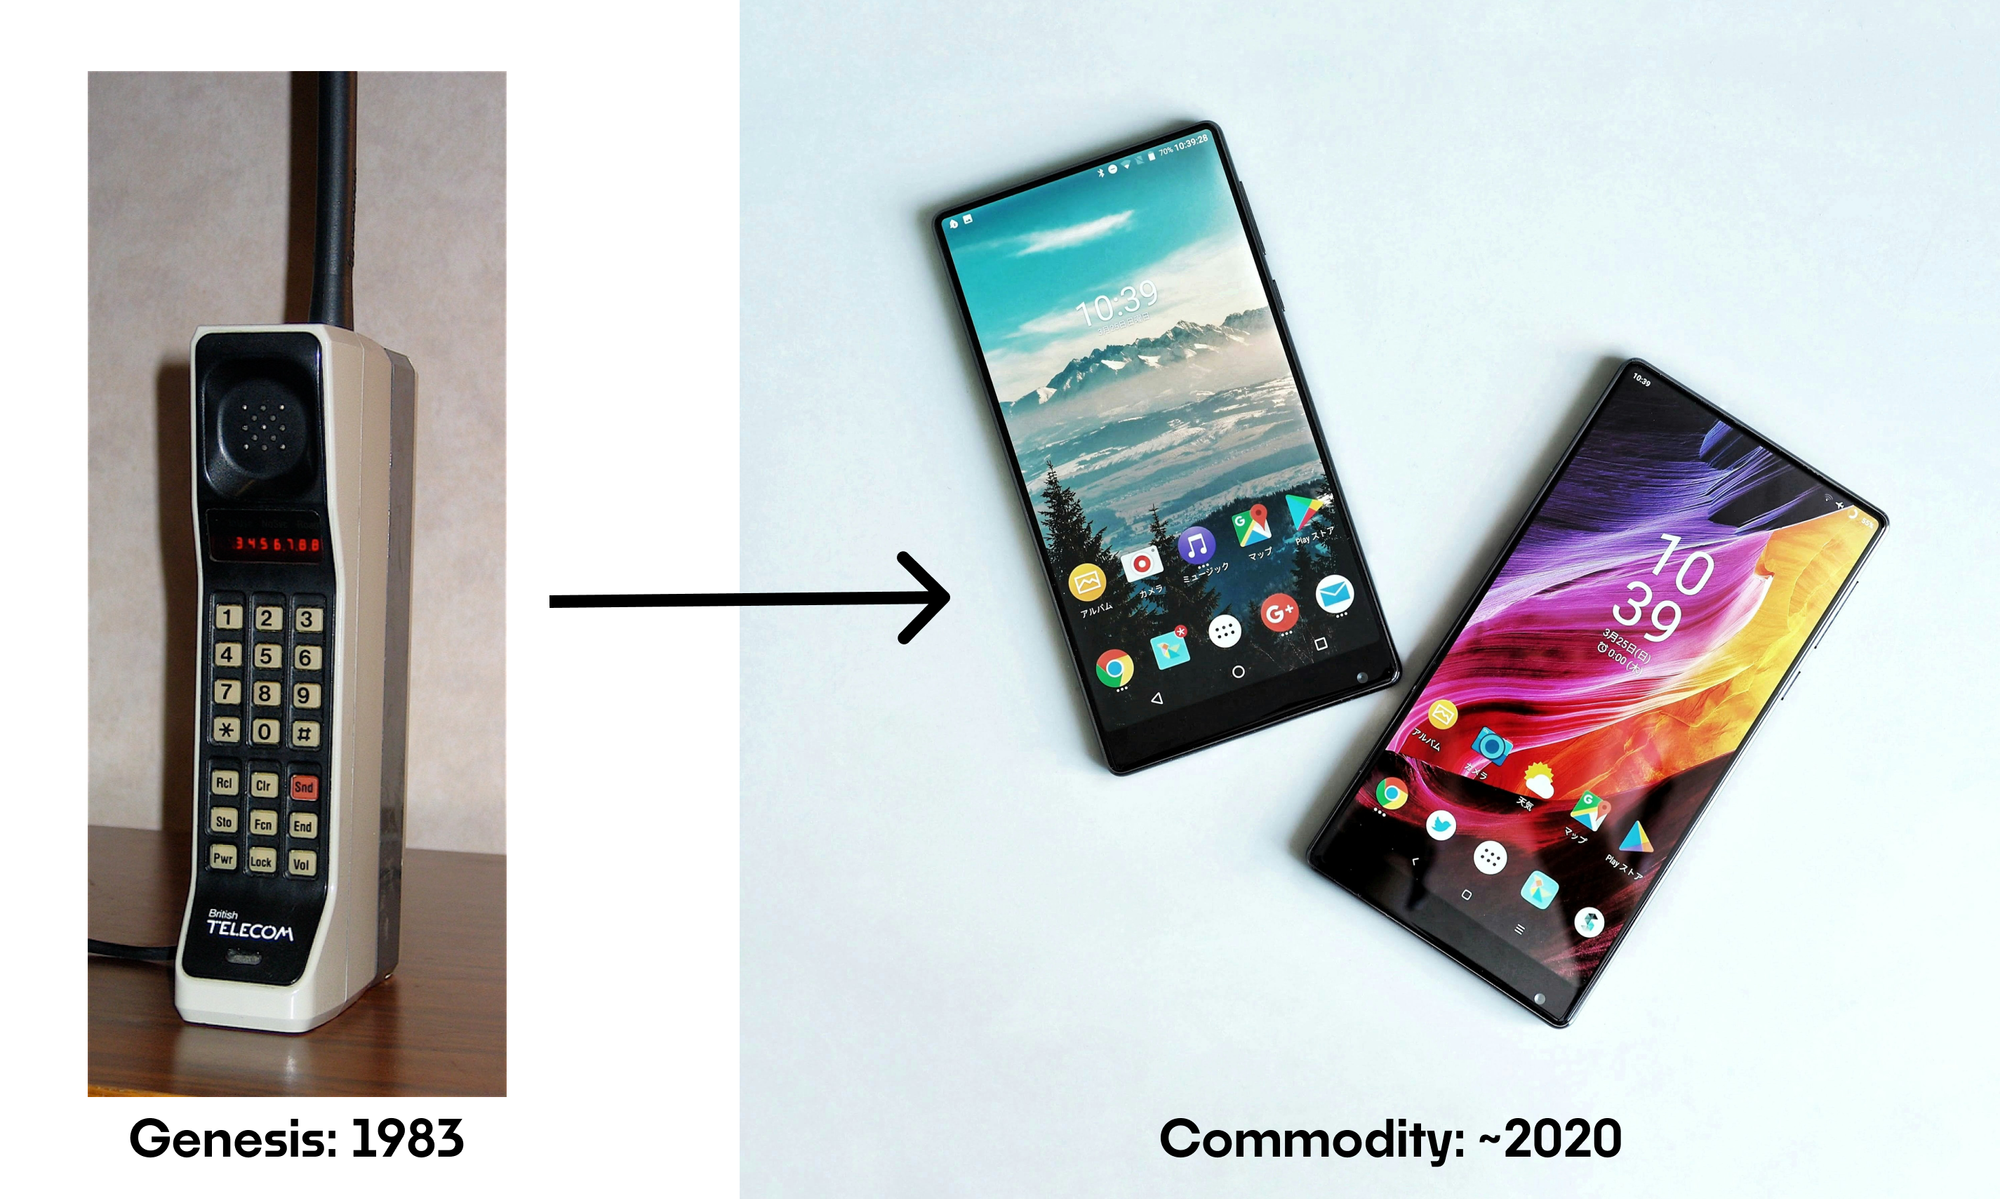 Pictures of the first mobile phone labeled "gensis" and two android smartphones labeled "commodity."